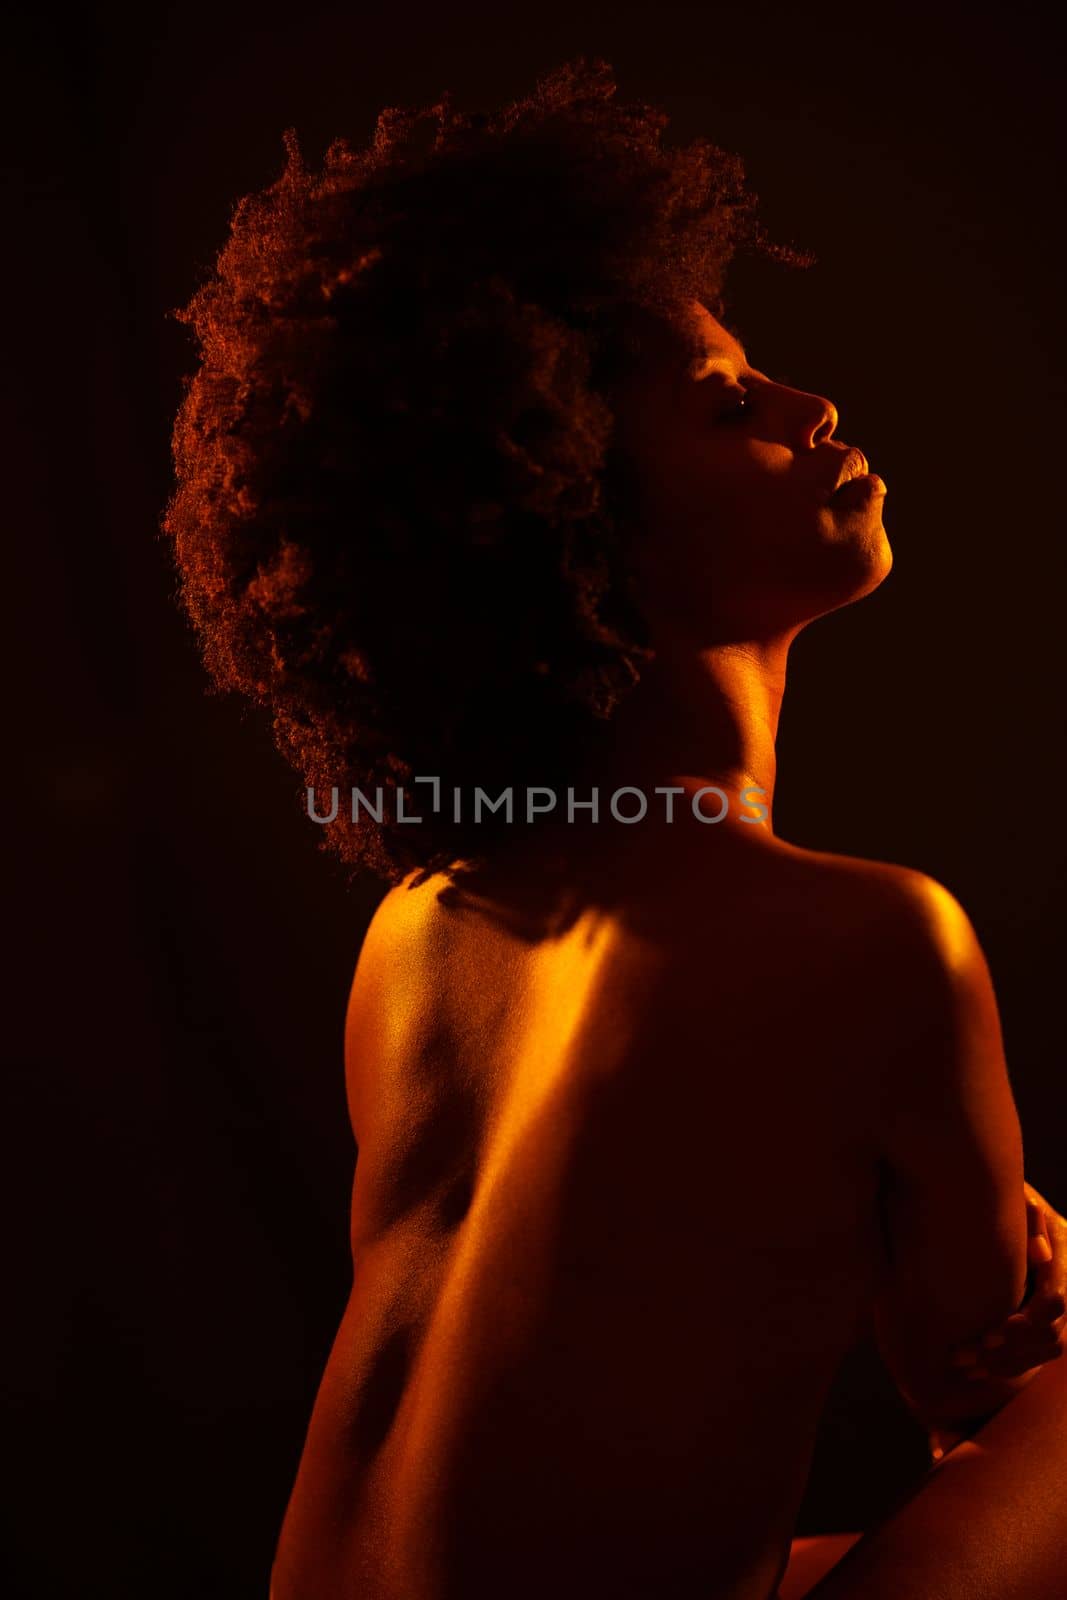 Sensual topless African American female model embracing body and closing eyes under orange neon illumination against black background.